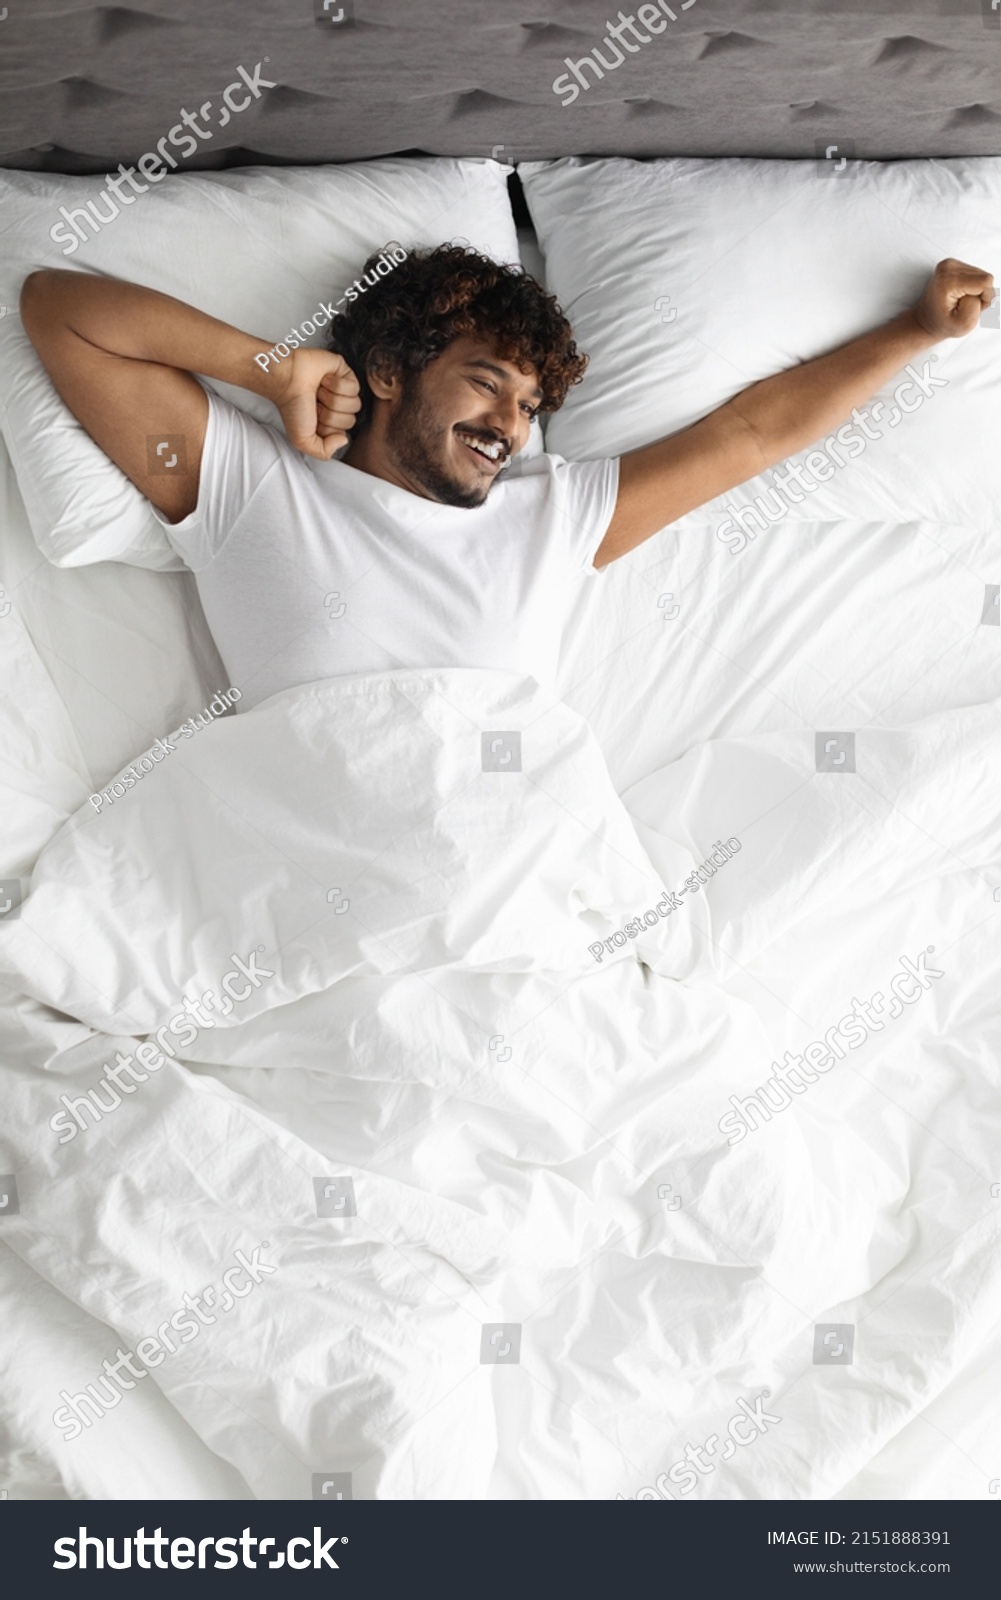 Happy curly hindu guy in white t-shirt stretching body while laying in comfortable bed, looking at copy space and smiling, enjoying new day, feeling fully rested, top view, vertical shot #2151888391